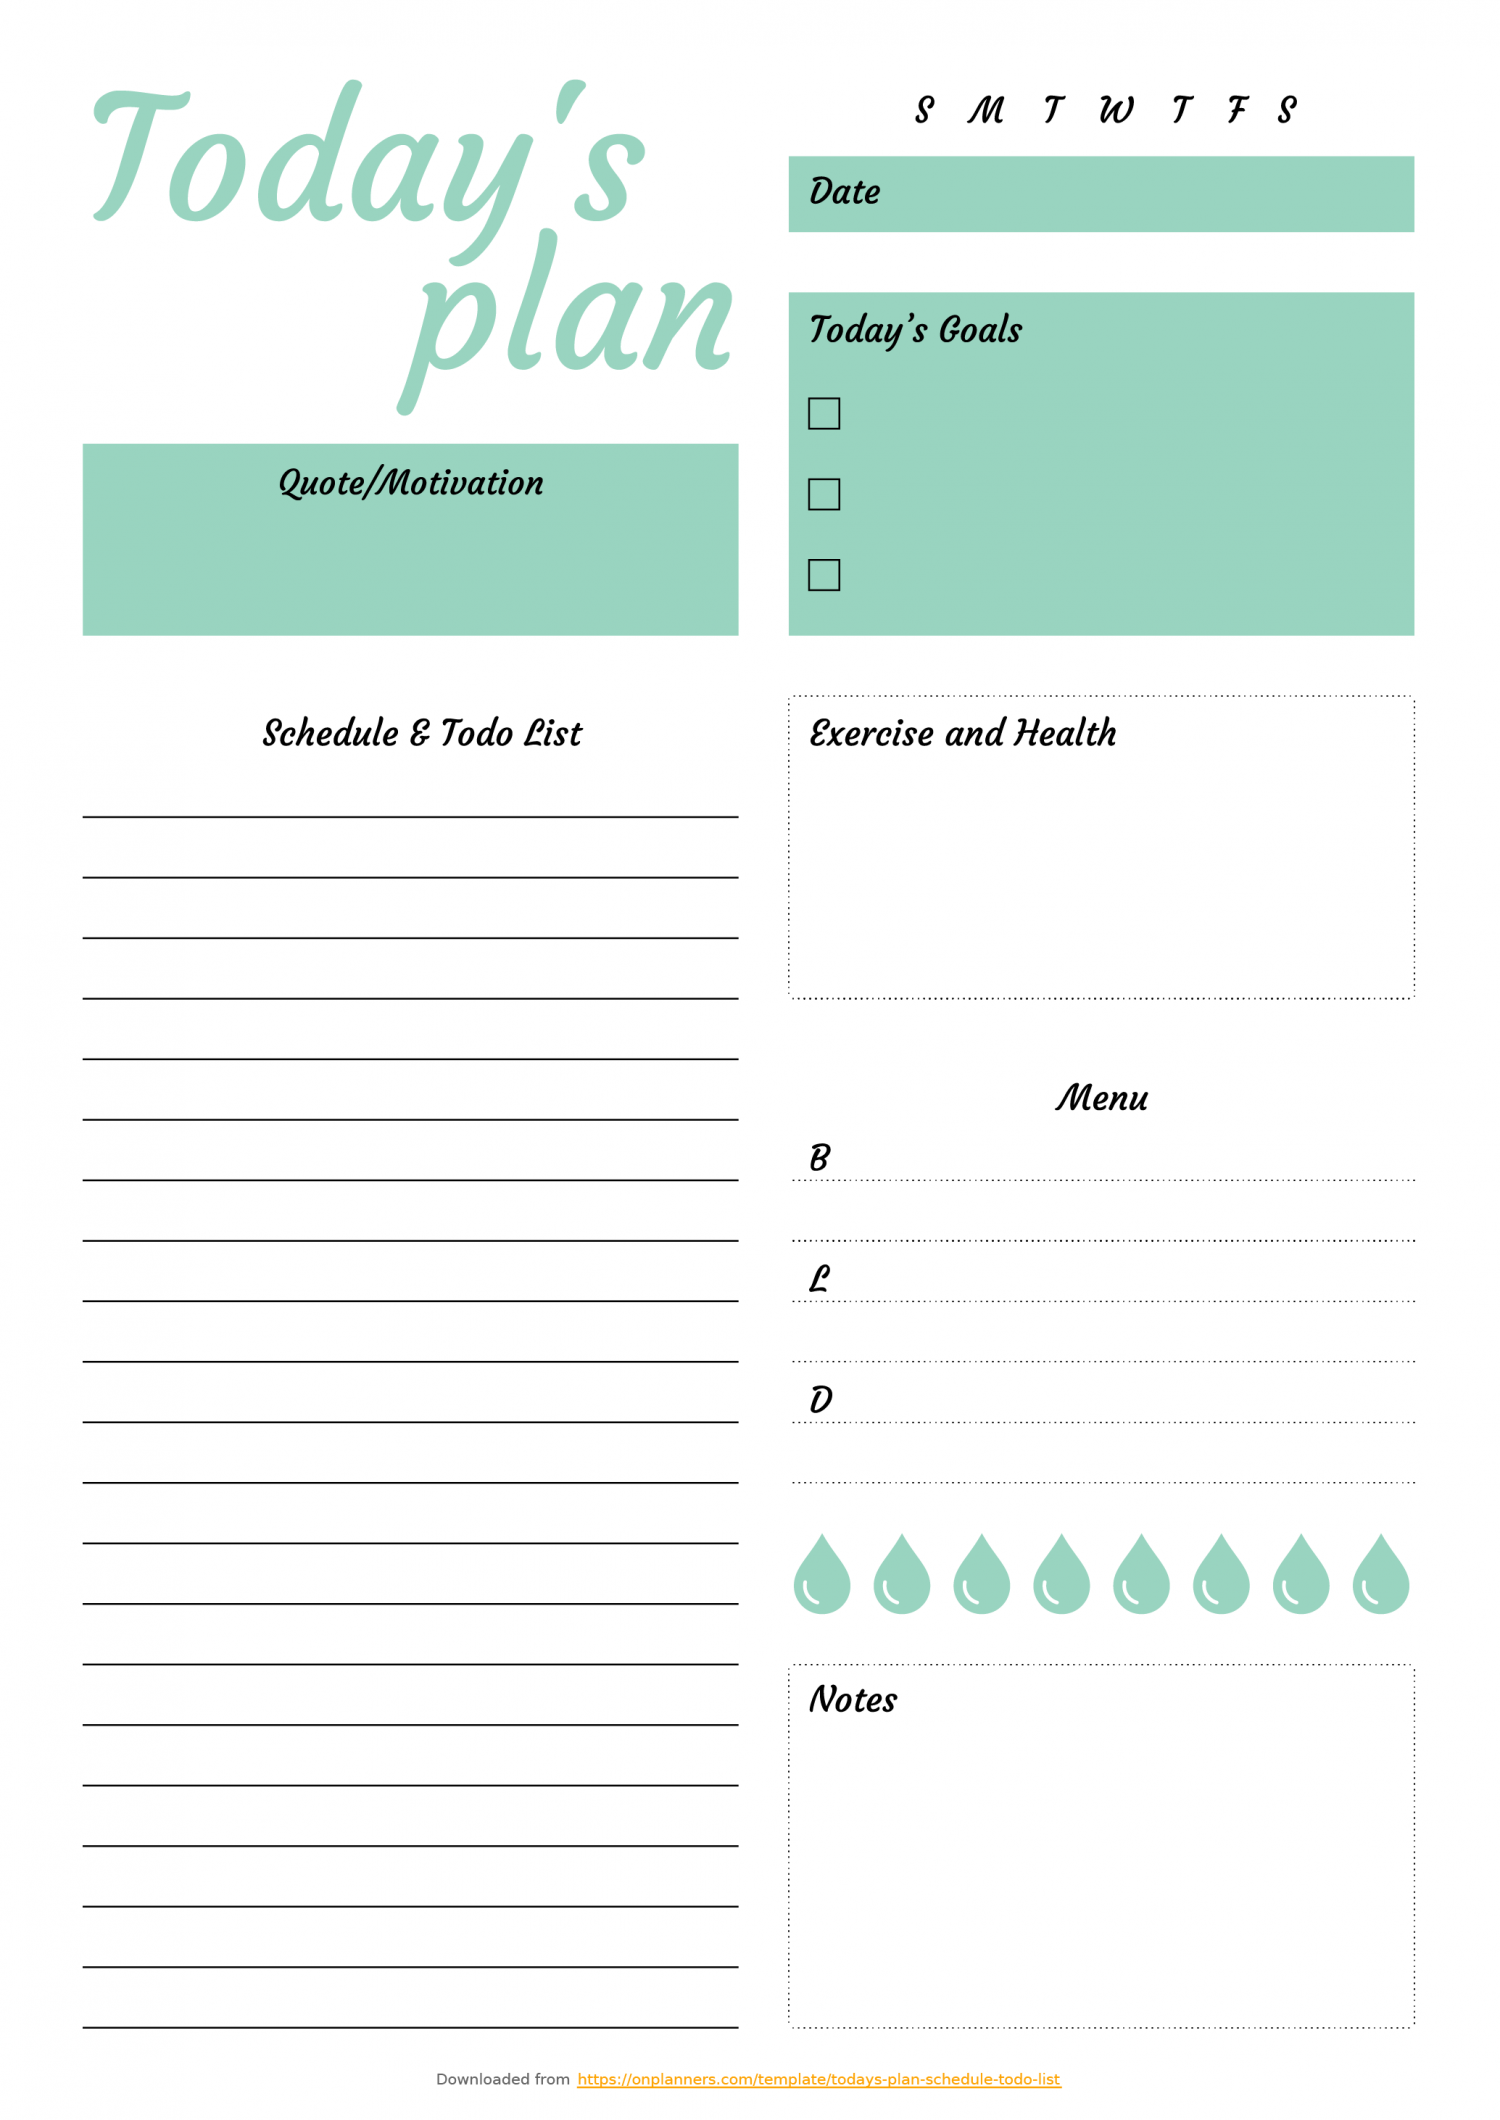 Free Printable Today's plan with Schedule & Todo List PDF Download